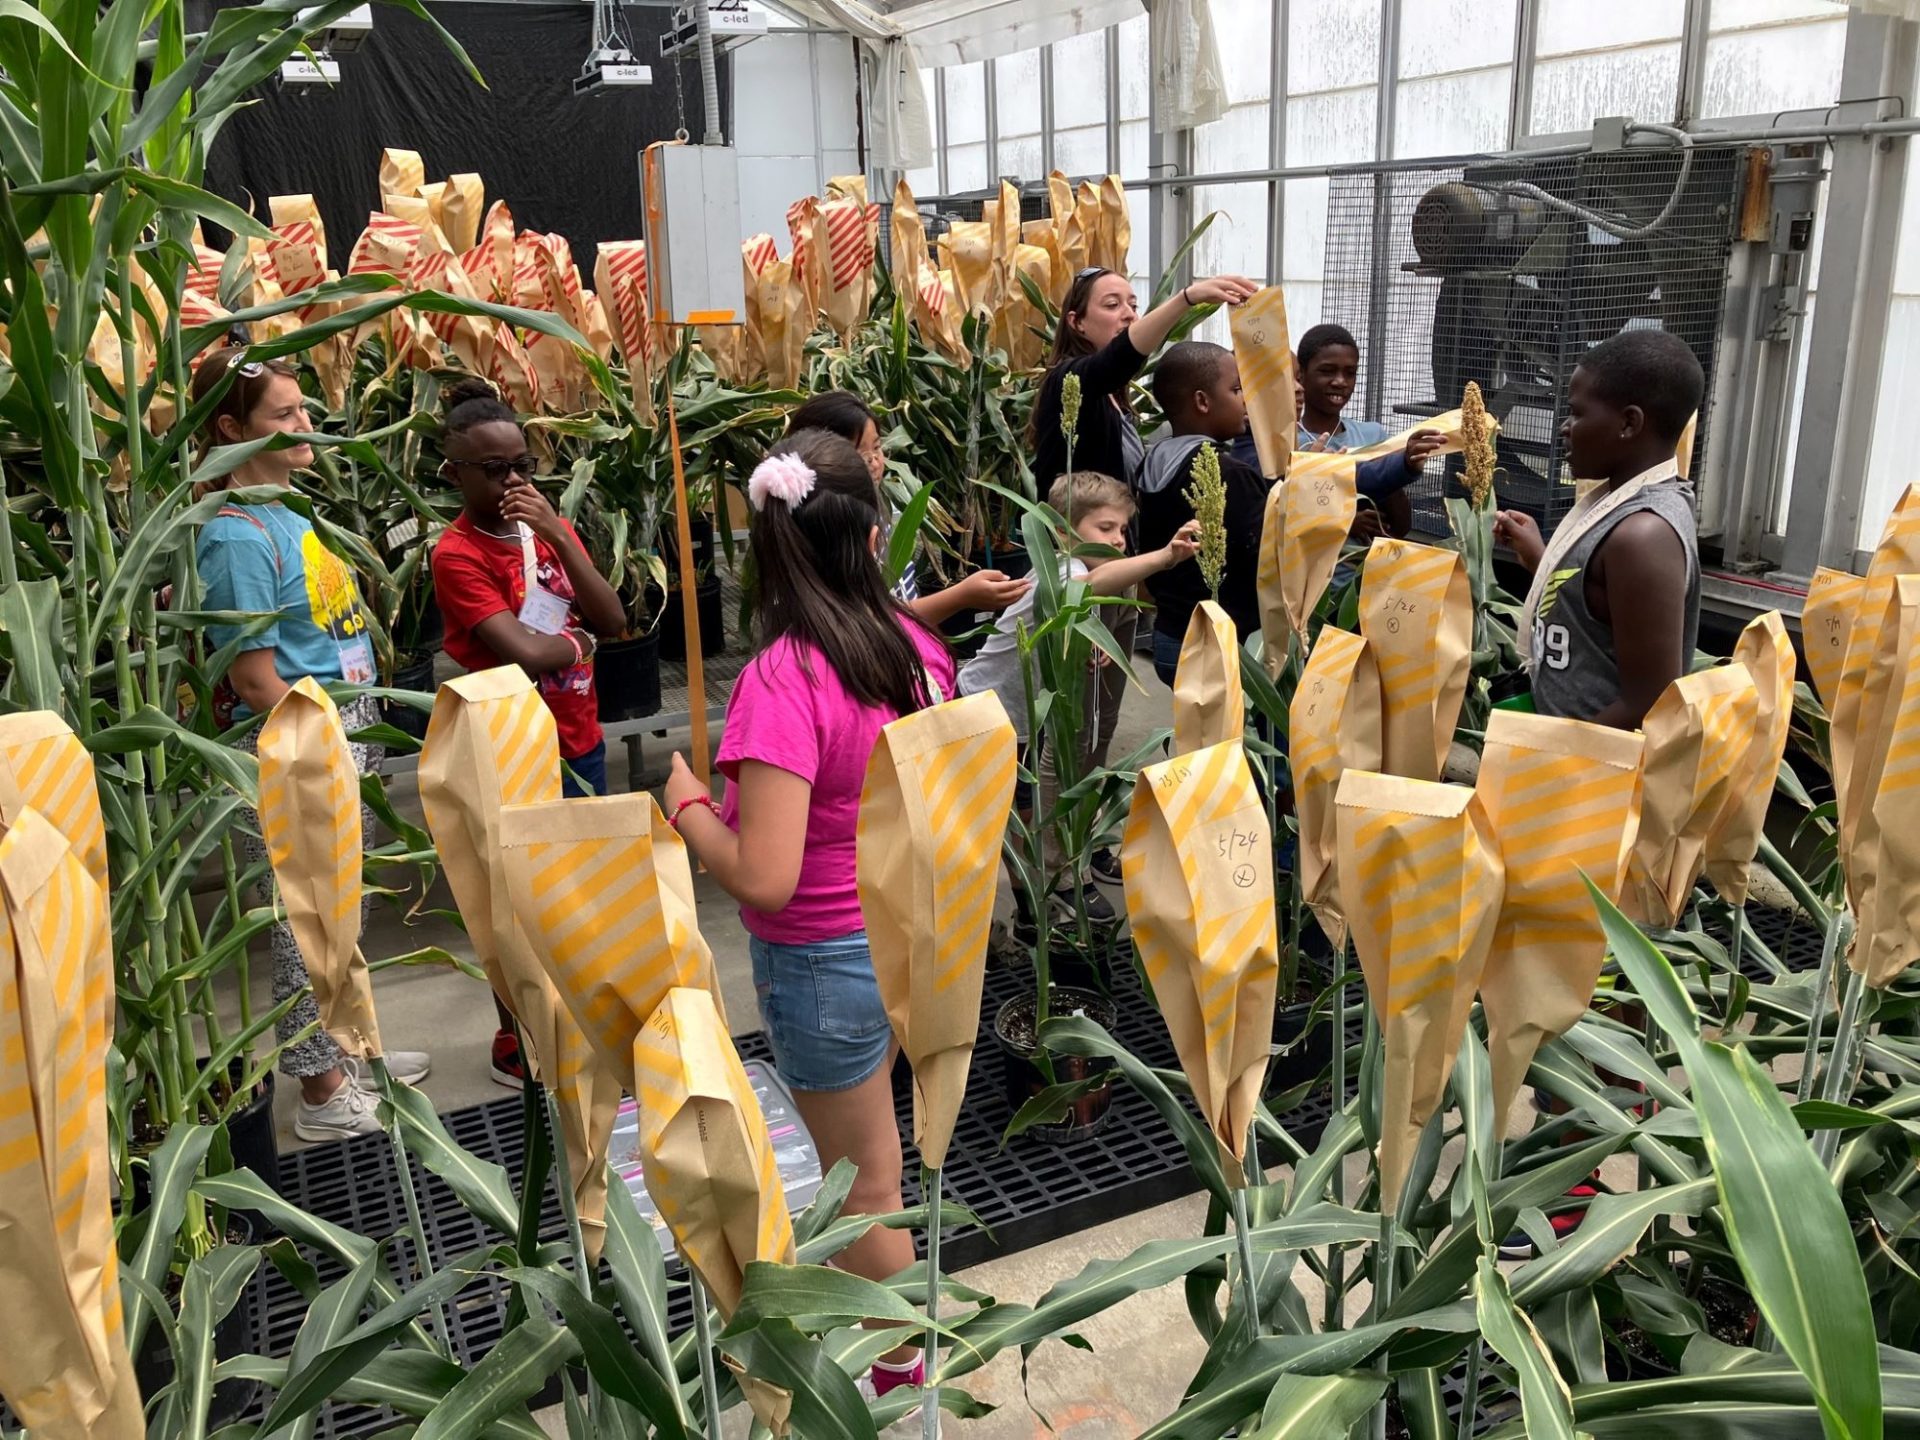 A greenhouse with rows of corn stalks, with the tops covered by bags. There are kids standing amongst the rows.